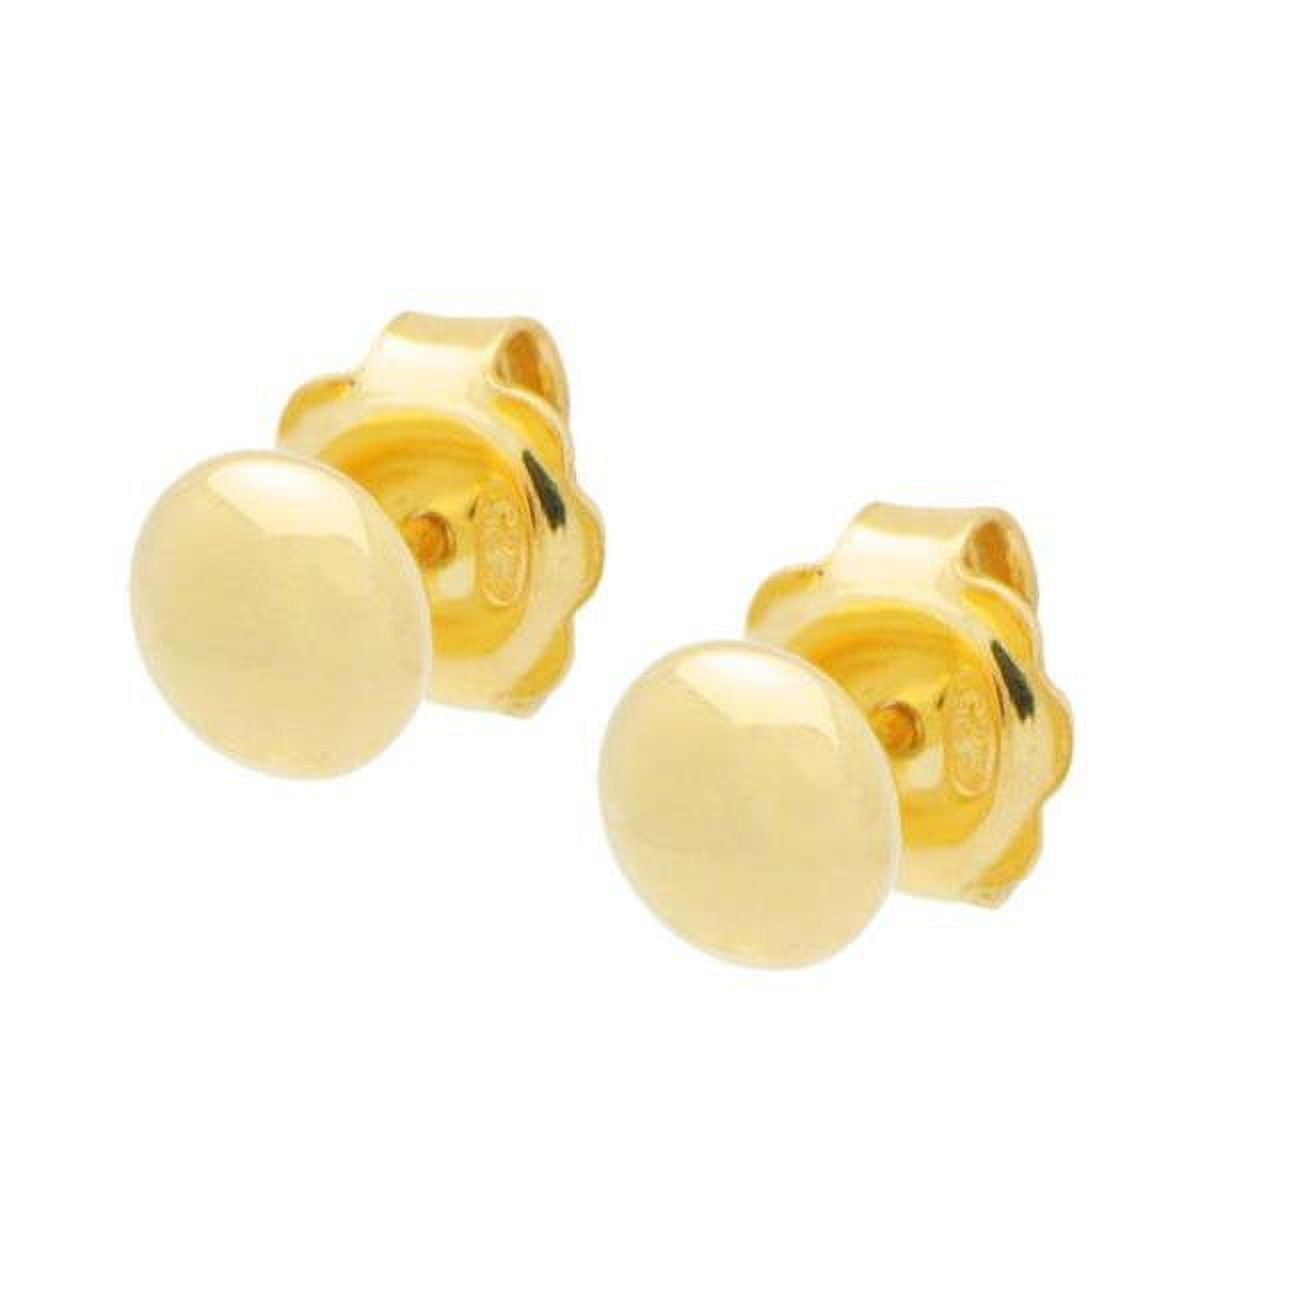 415118g 6 Mm Mirror Gold Button Stud Earrings In Sterling Silver